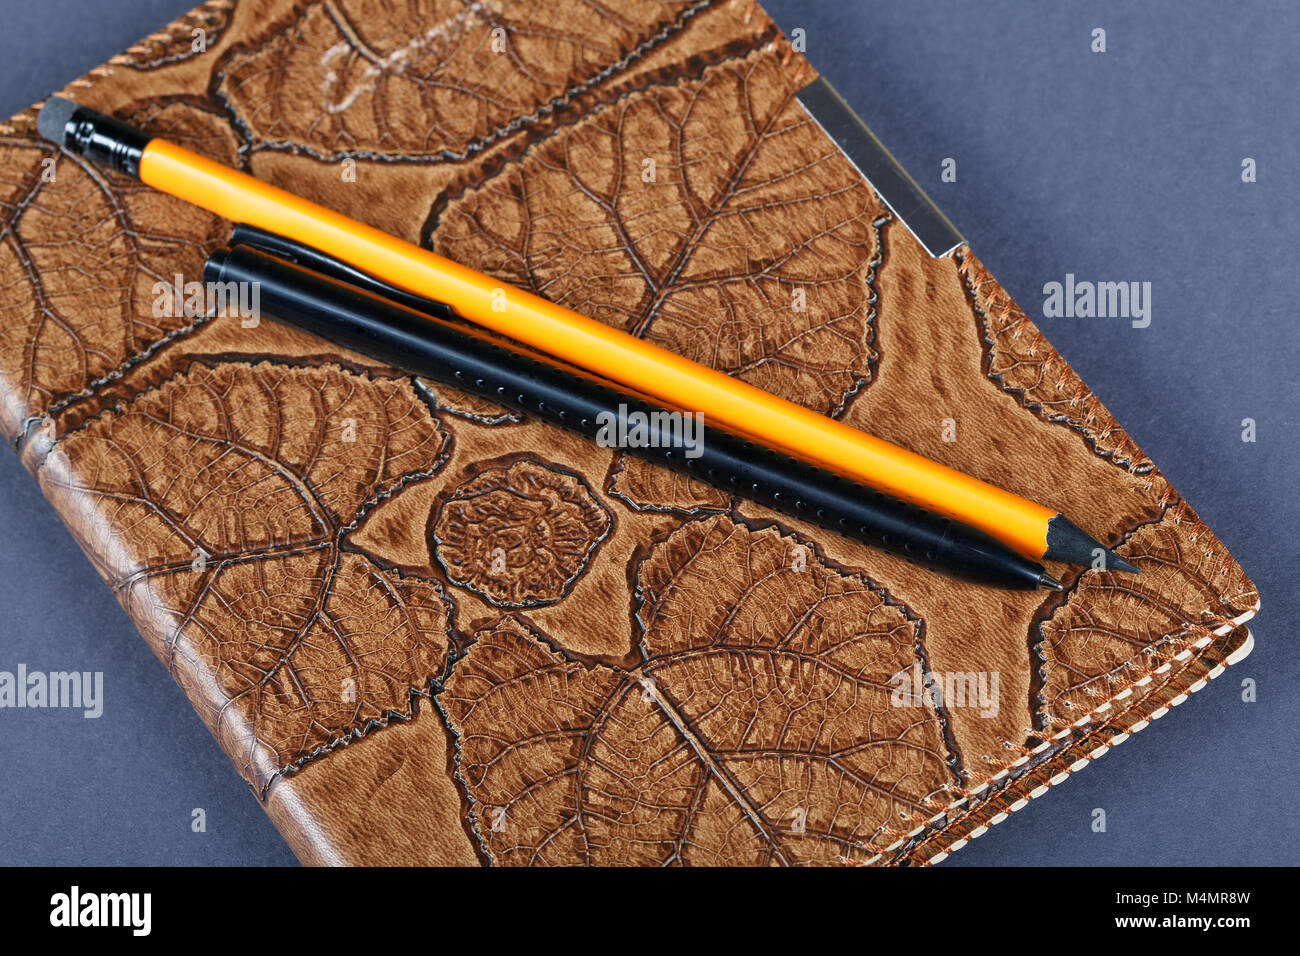 notebooks in leather covers and a pencil close up Stock Photo